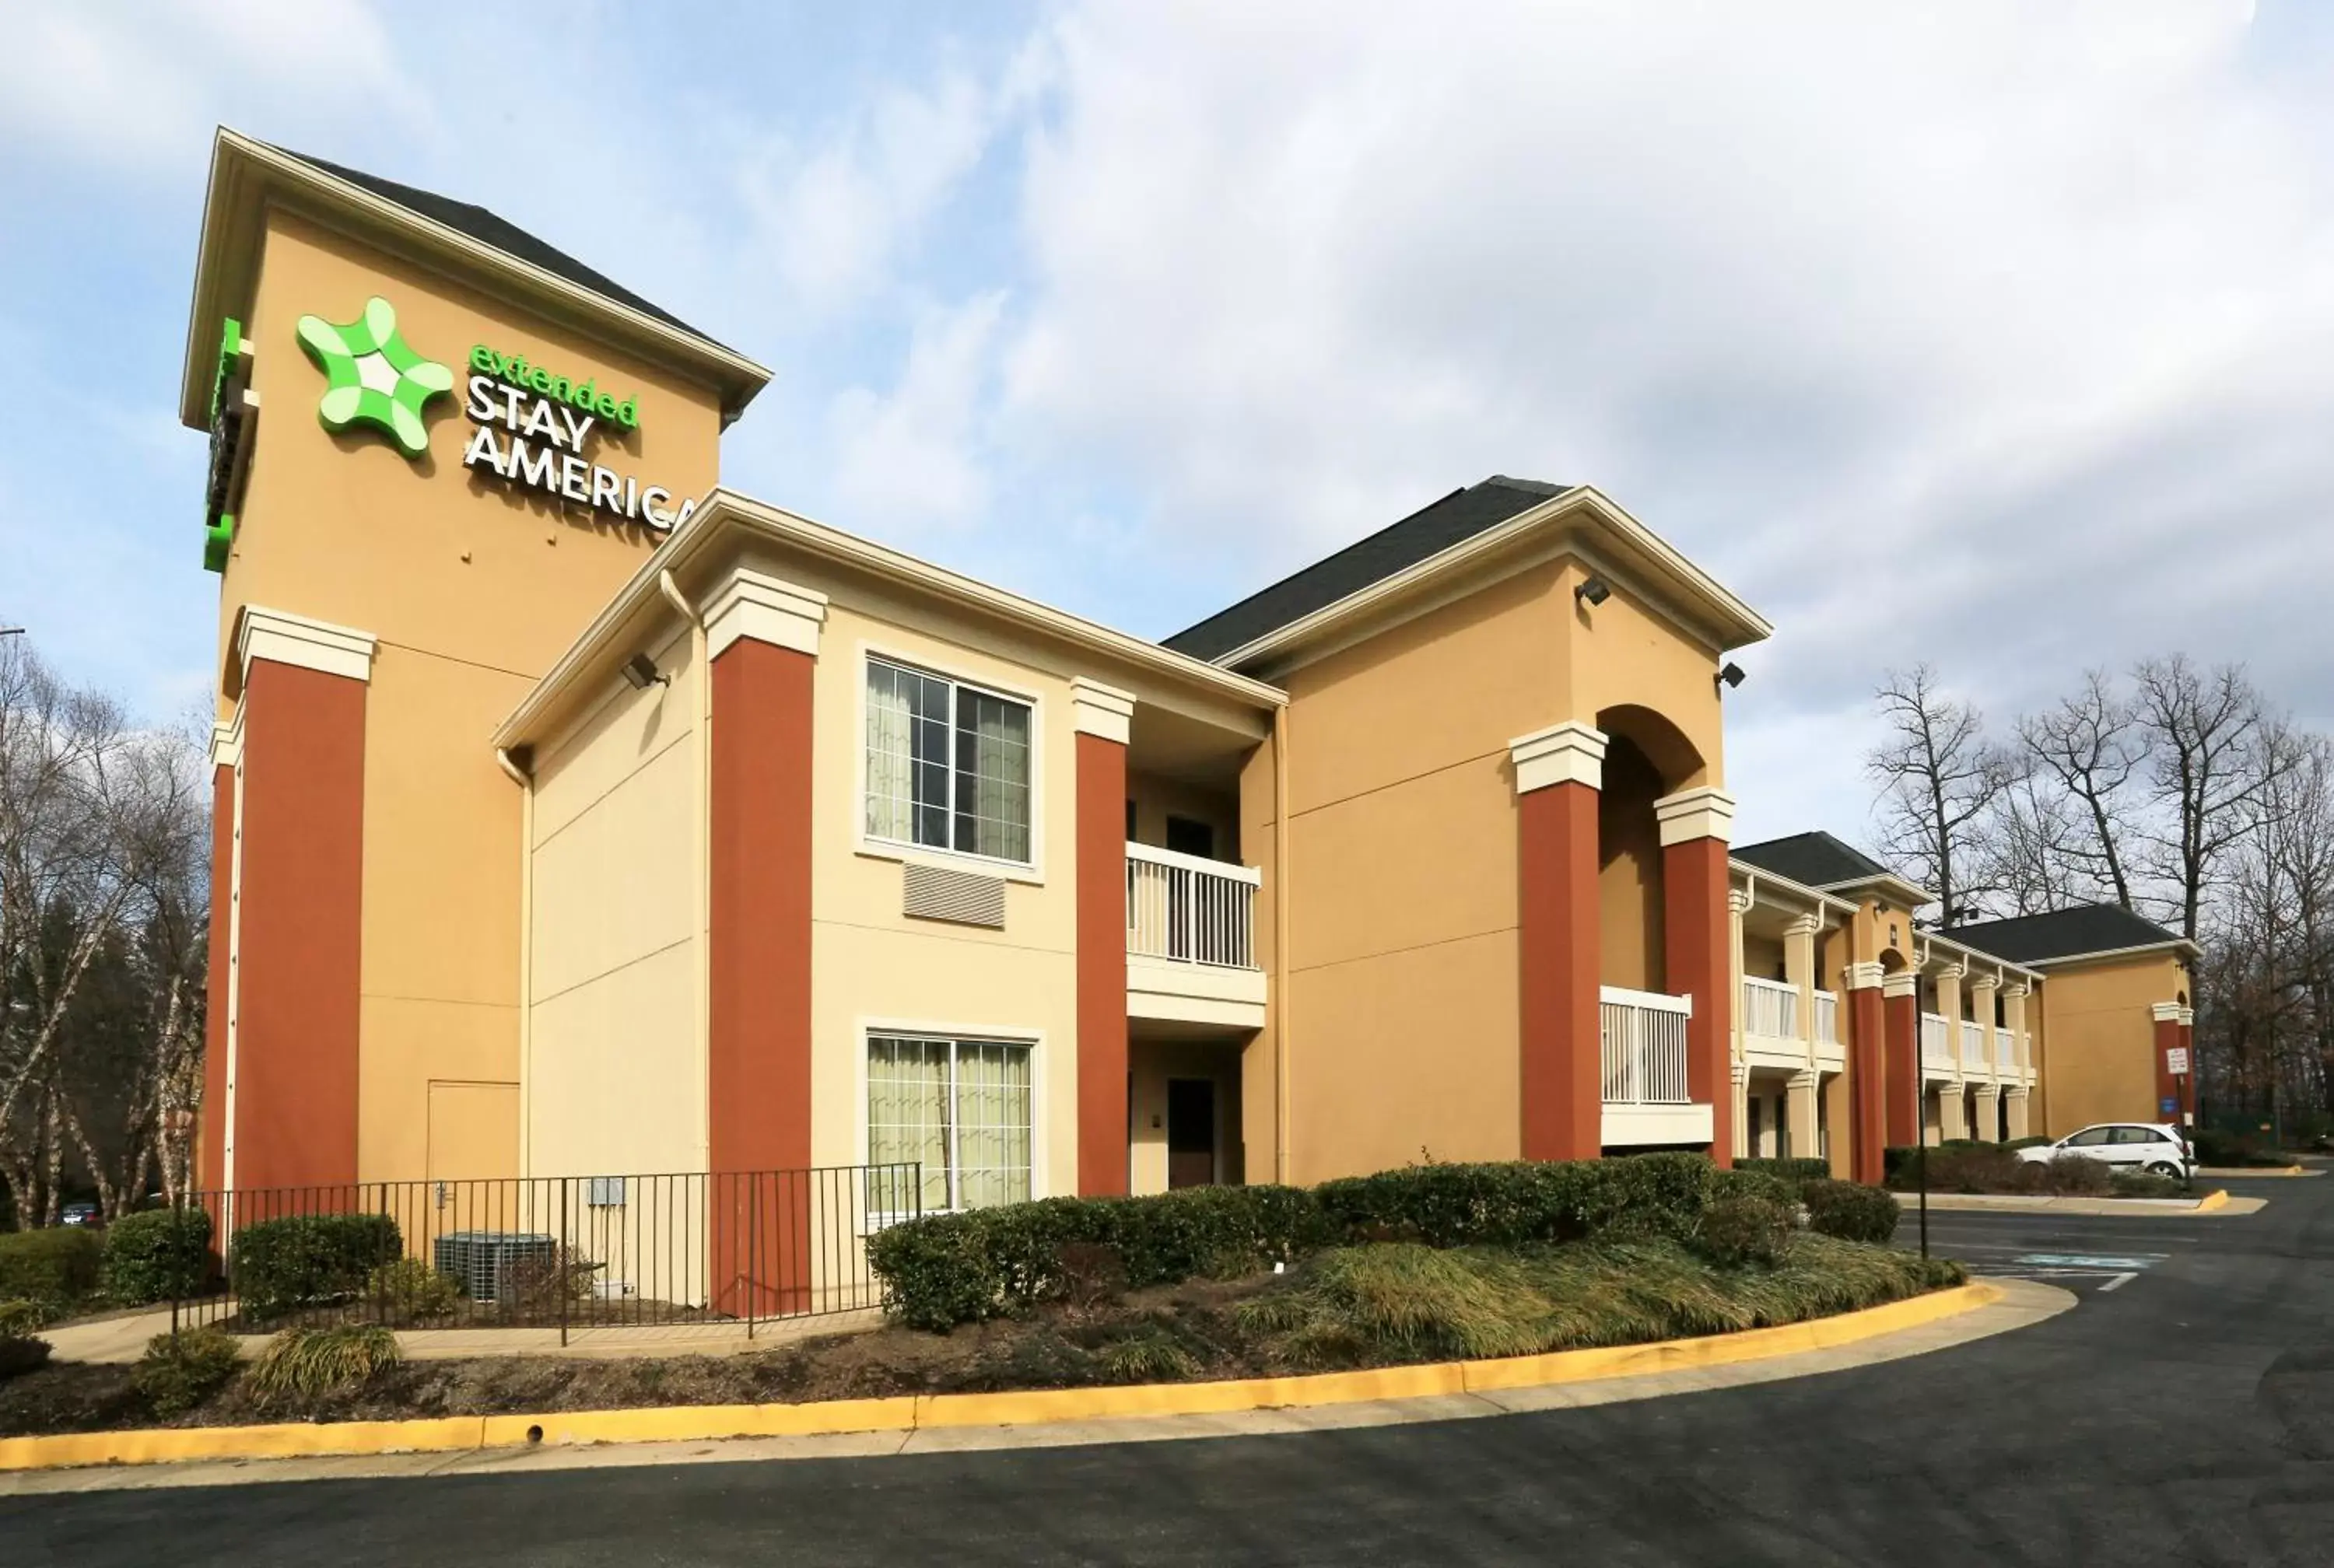 Property building in Extended Stay America Suites - Washington, DC - Fairfax - Fair Oaks